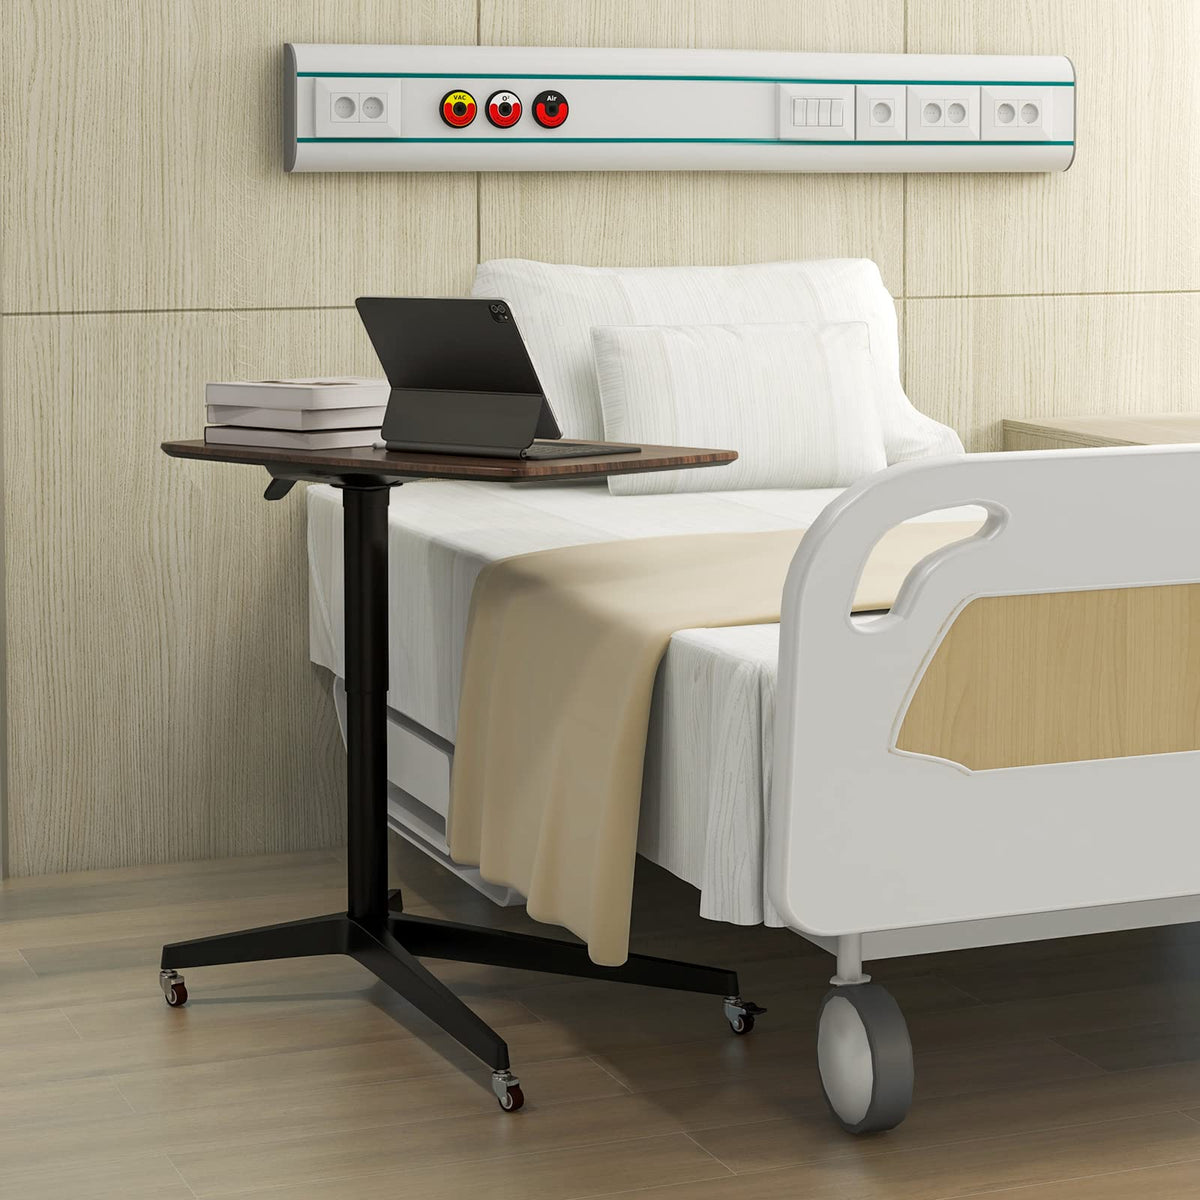 Giantex Adjustable Overbed Table, Pneumatic Medical Bedside Table